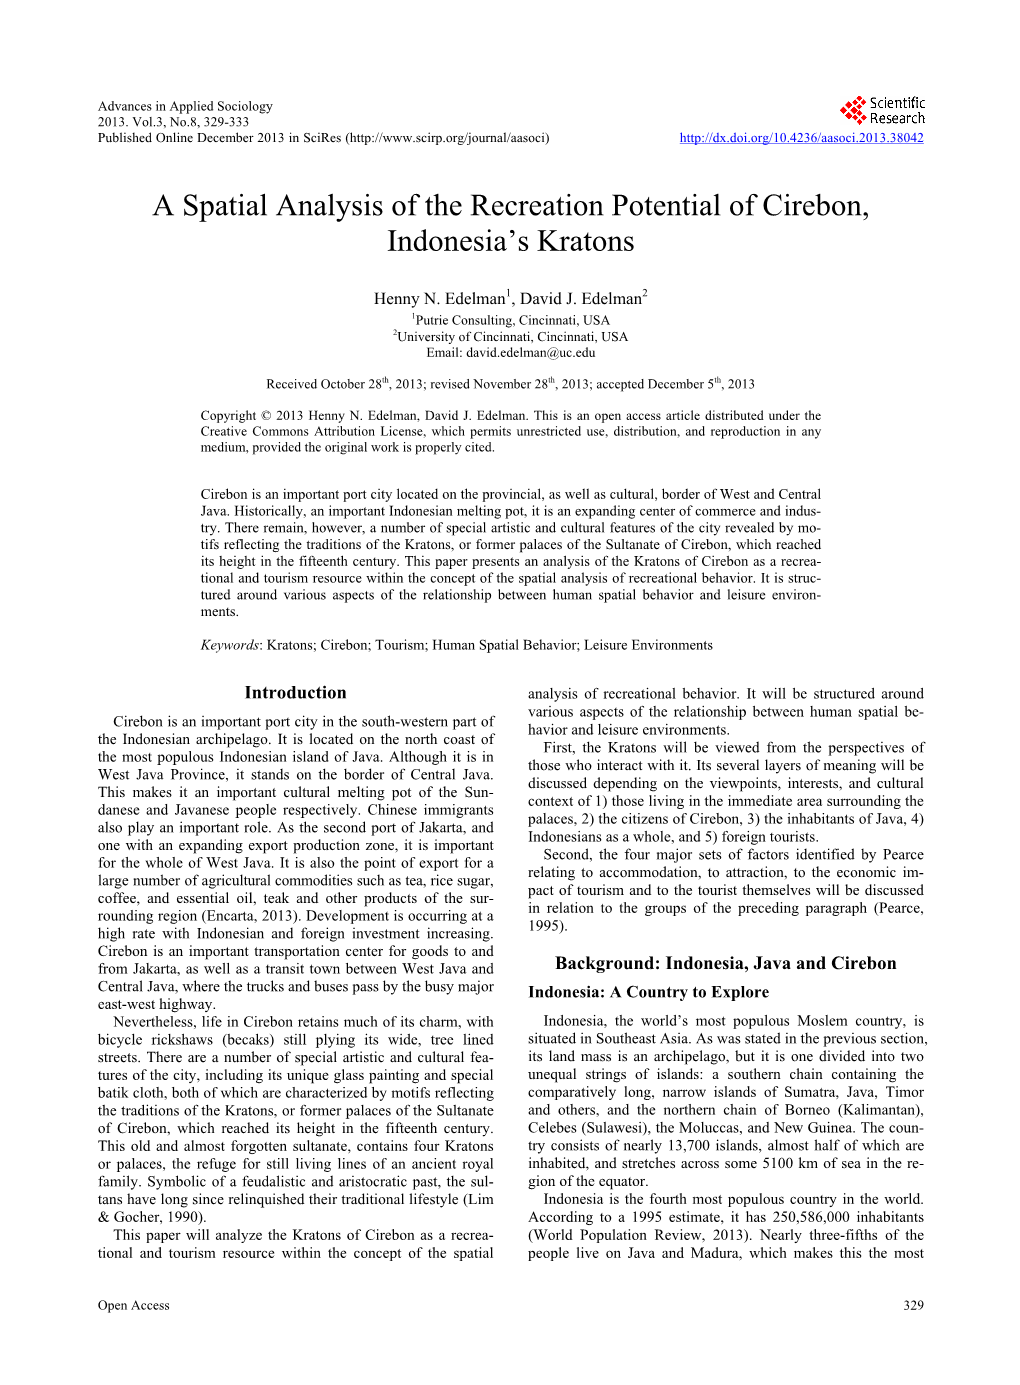 A Spatial Analysis of the Recreation Potential of Cirebon, Indonesia’S Kratons